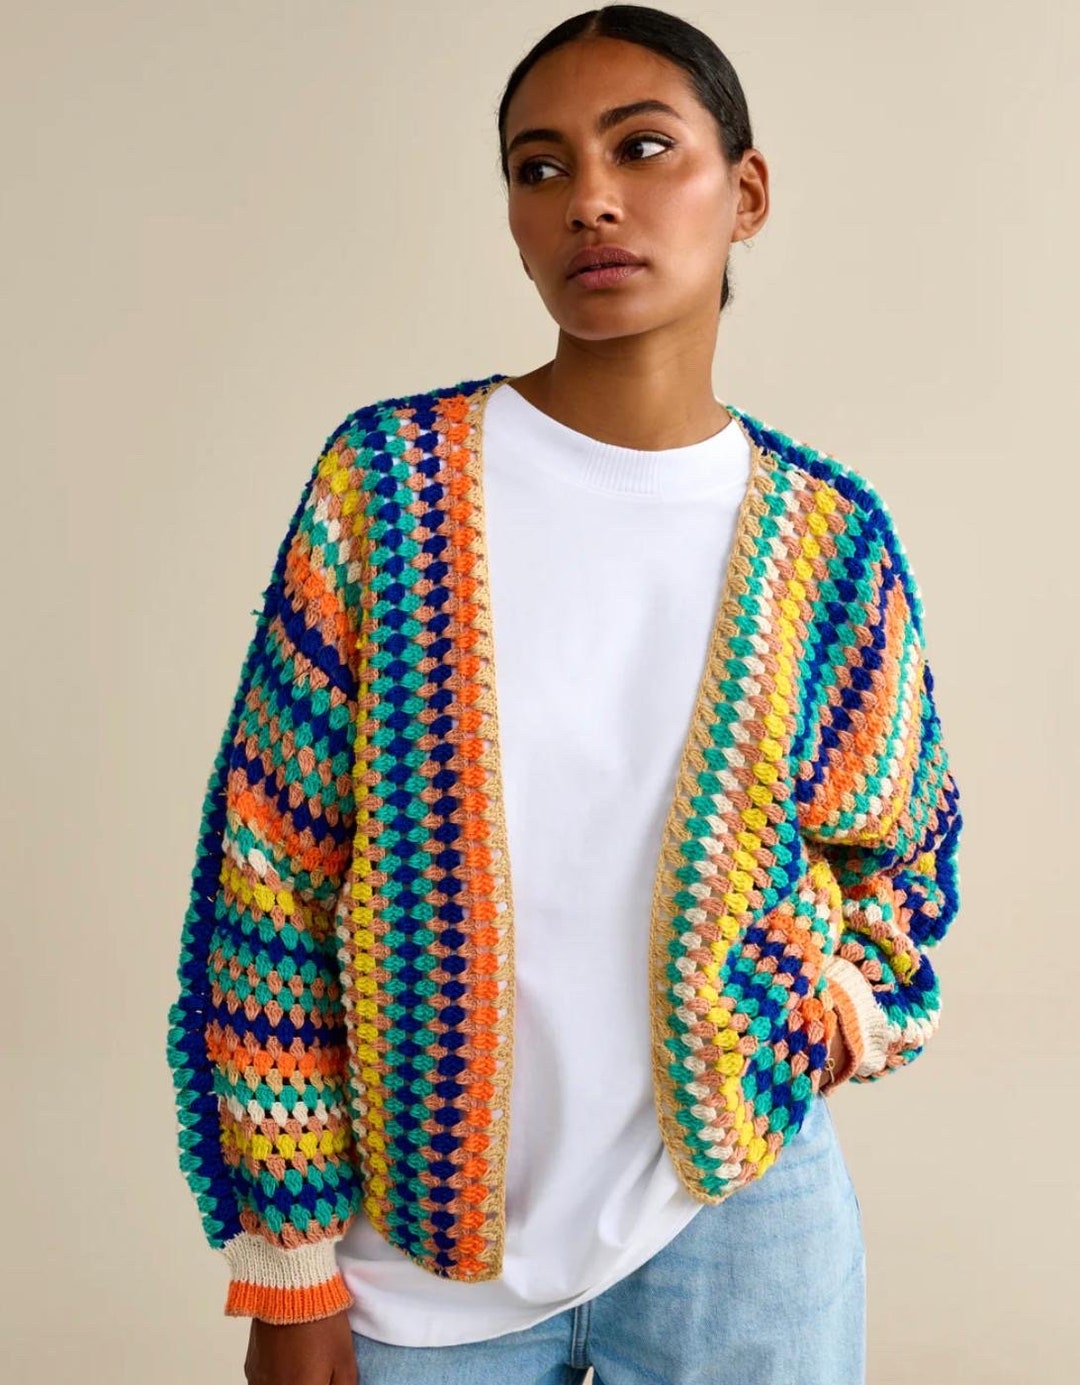 Colorful Cardigan Woman Crochet Sweater Knitted - Etsy